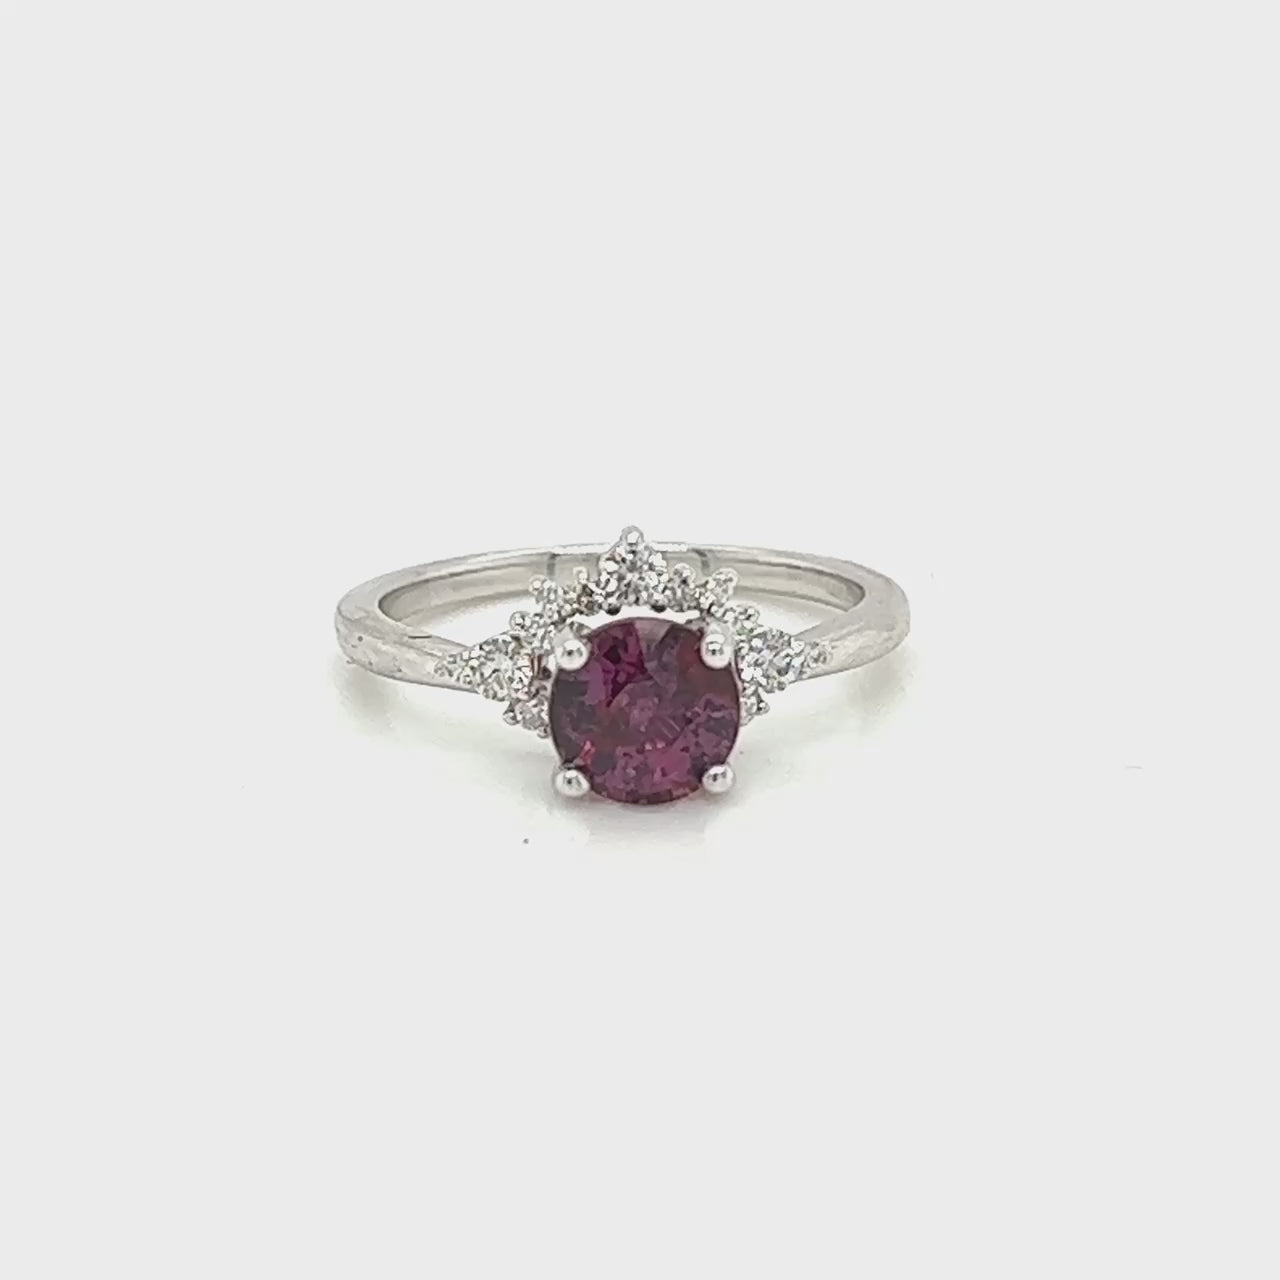 Athena Ring with a 1.72 Carat Round Purple Pink Sapphire and White Accent Diamonds in 14k White Gold - Ready to Size and Ship